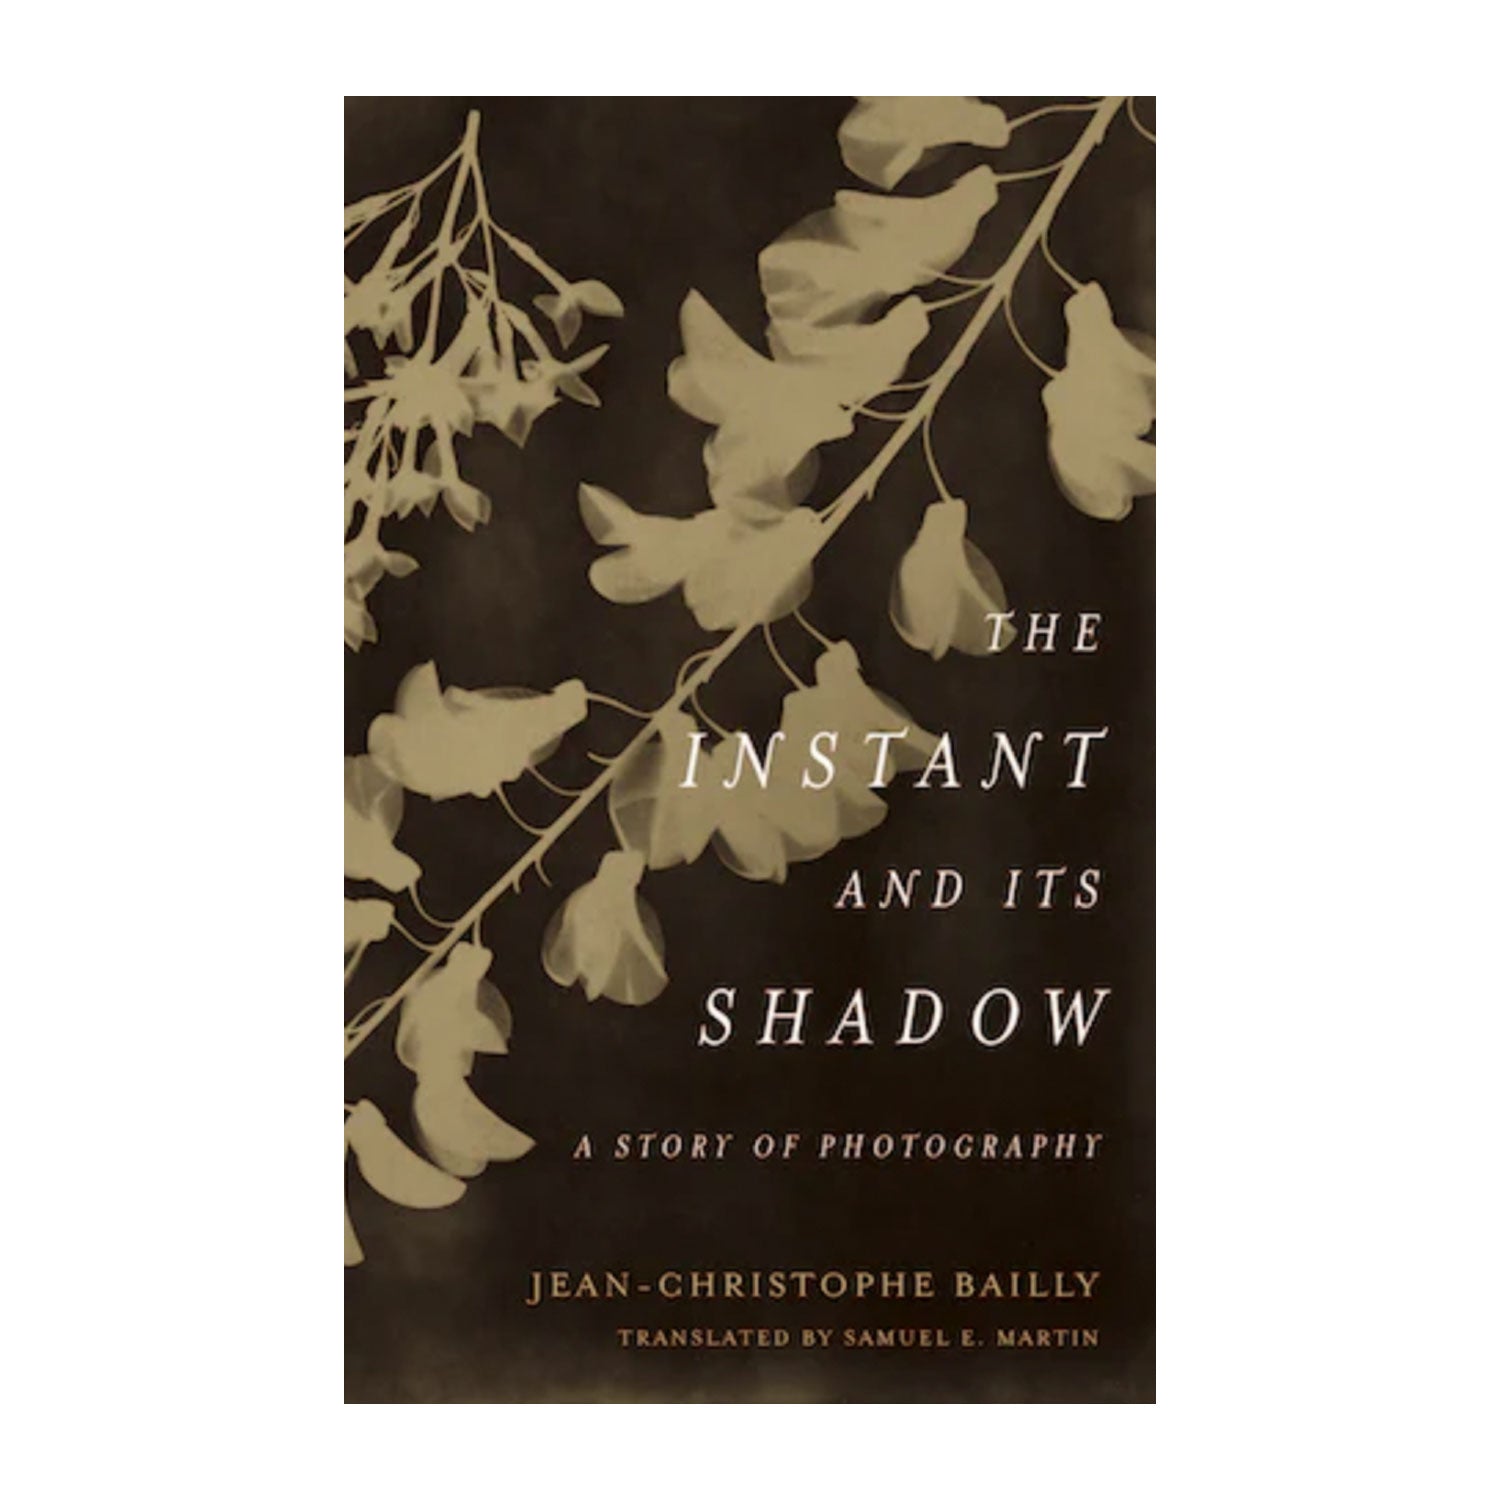 The Instant and its Shadow: A Story of Photography by Jean-Christophe Bailly. Photo Museum Ireland